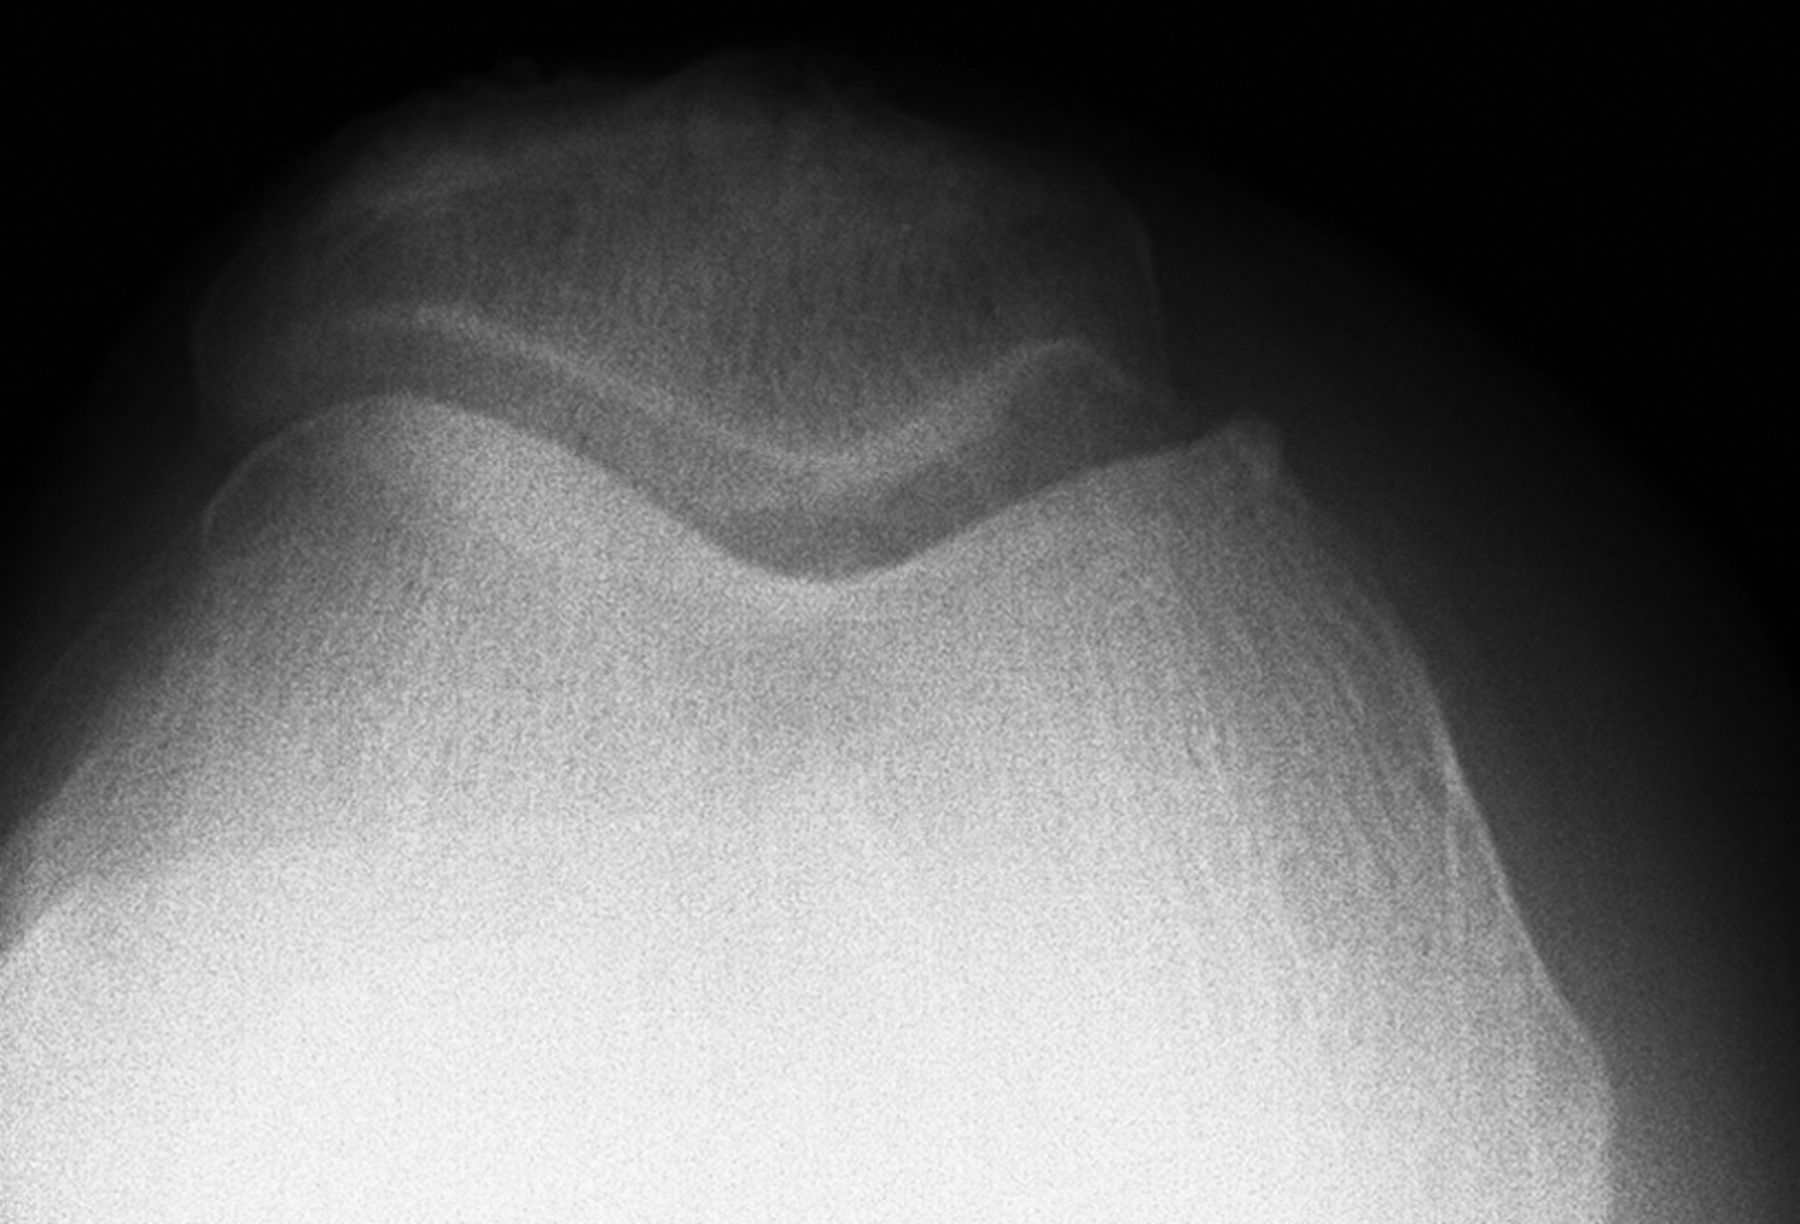 Fig. 3 
          Pre-operative radiograph of medial patellar
cartilage lesion that was treated with a medial unicompartmental arthroplasty.
        